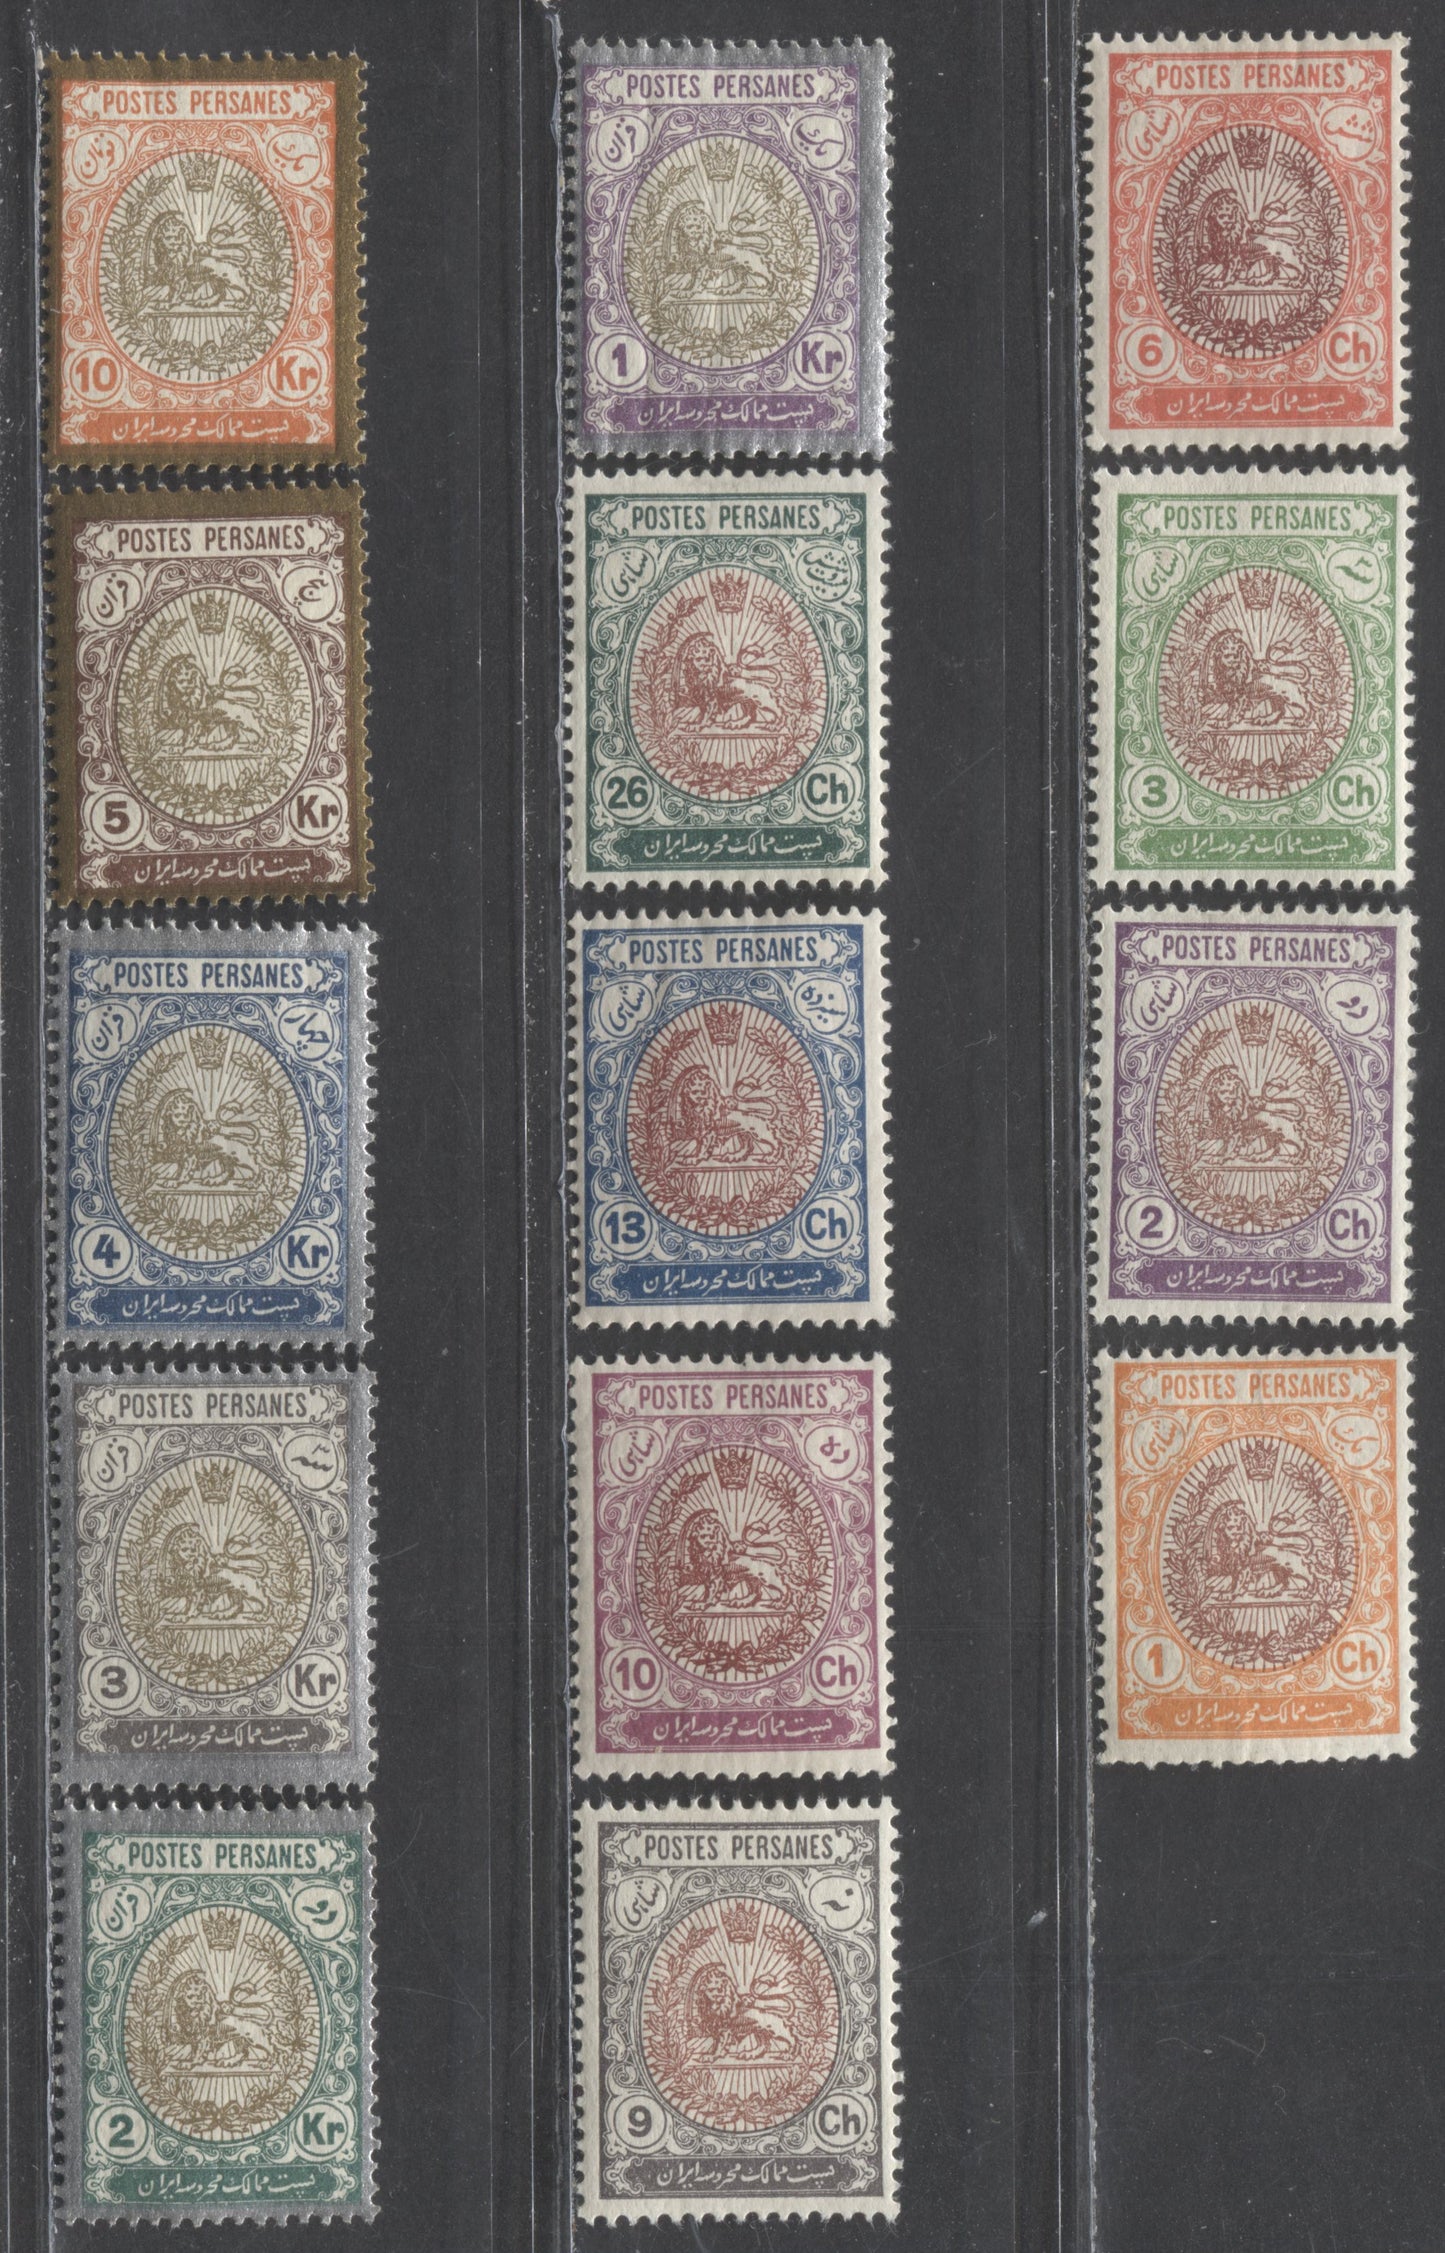 Lot 114 Persia SC#448/463 1909 Arms Definitives, 16 F/VFOG Singles, Click on Listing to See ALL Pictures, 2022 Scott Classic Cat. $35 USD